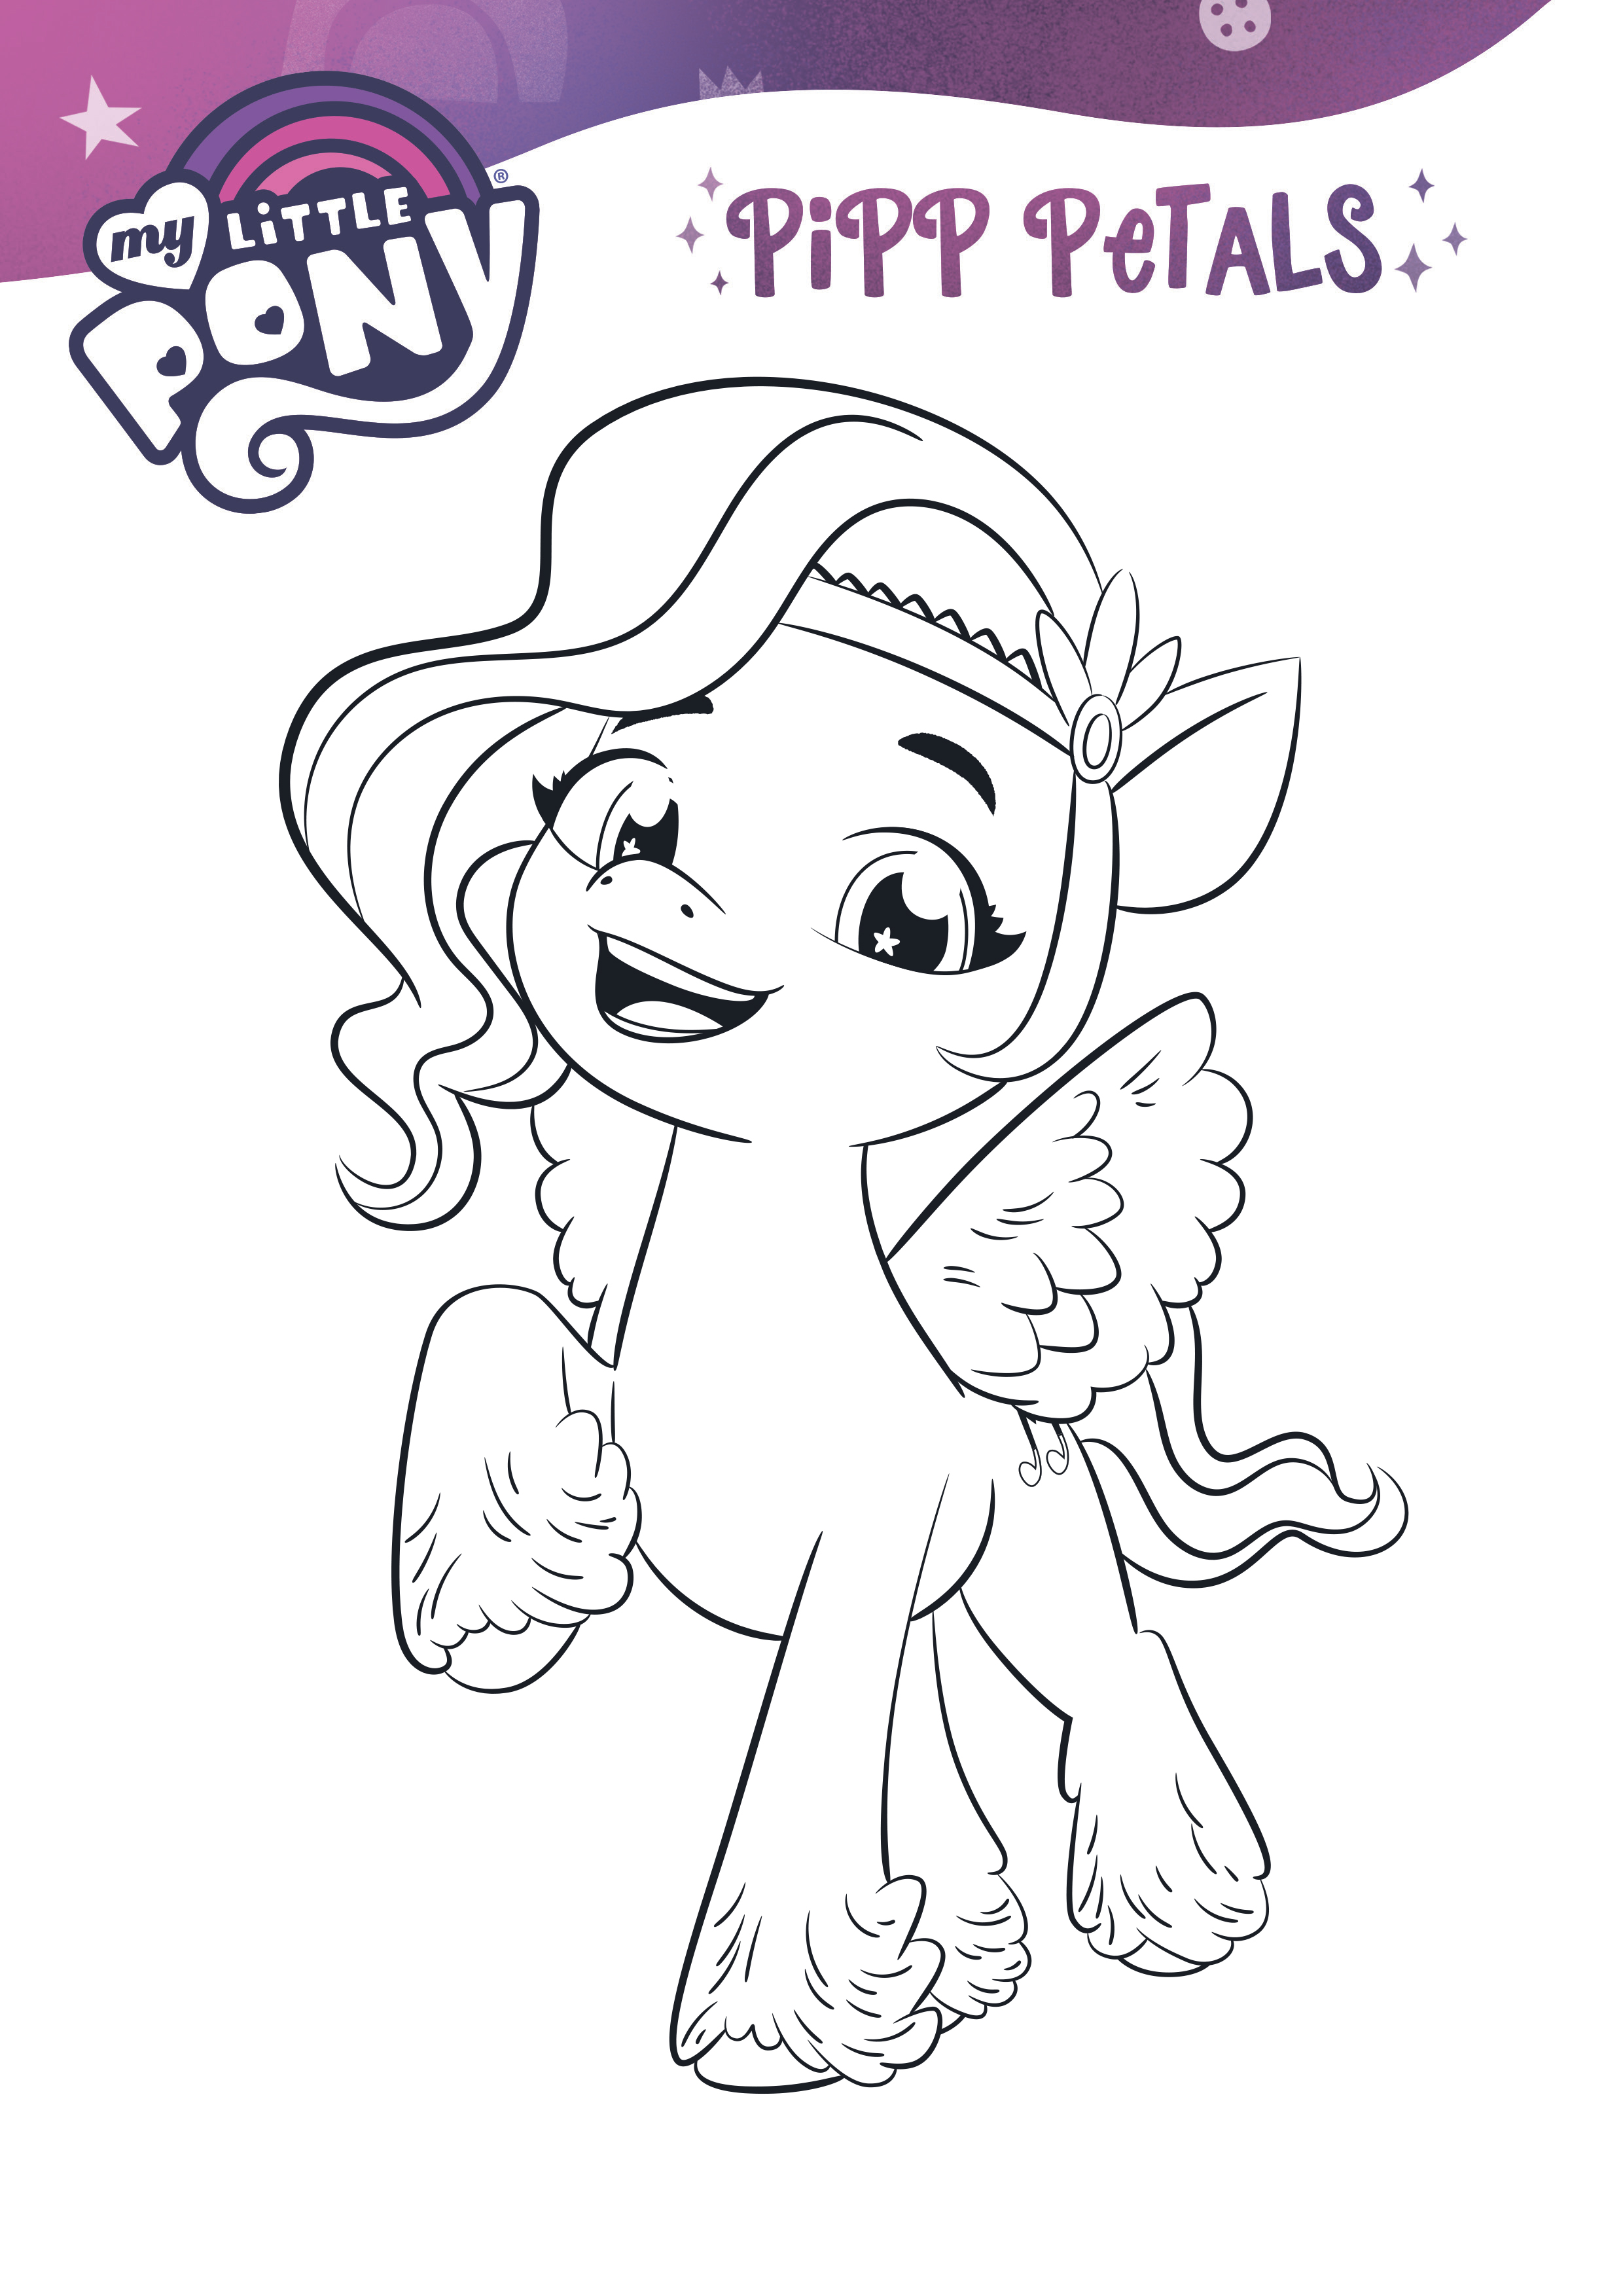 My Little Pony A New Generation movie coloring pages   YouLoveIt.com